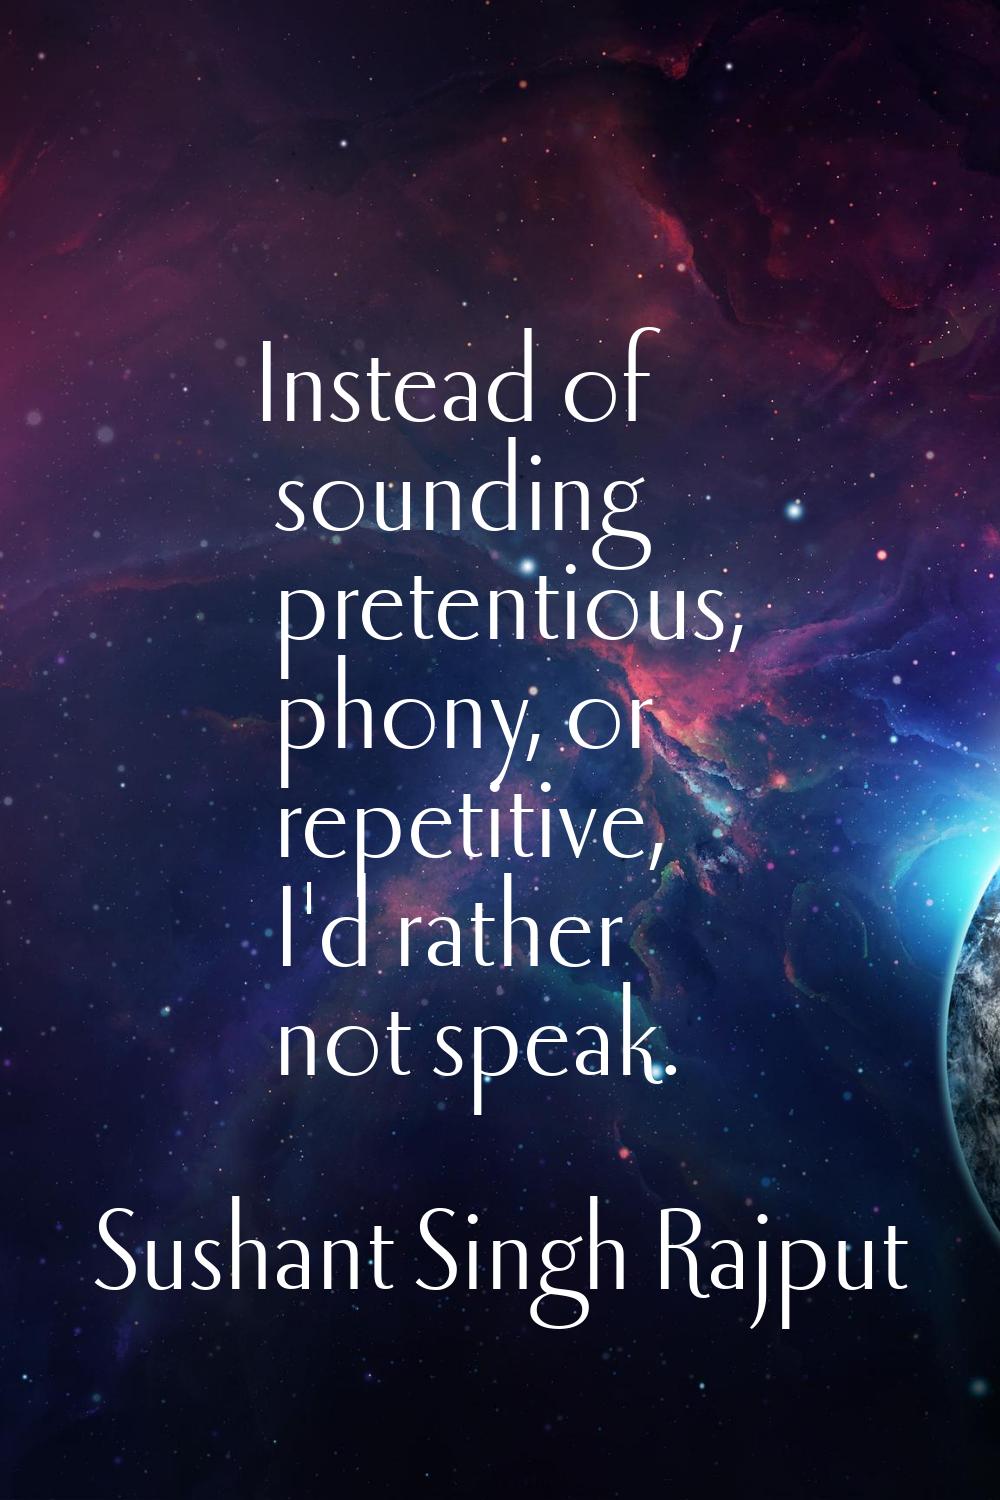 Instead of sounding pretentious, phony, or repetitive, I'd rather not speak.